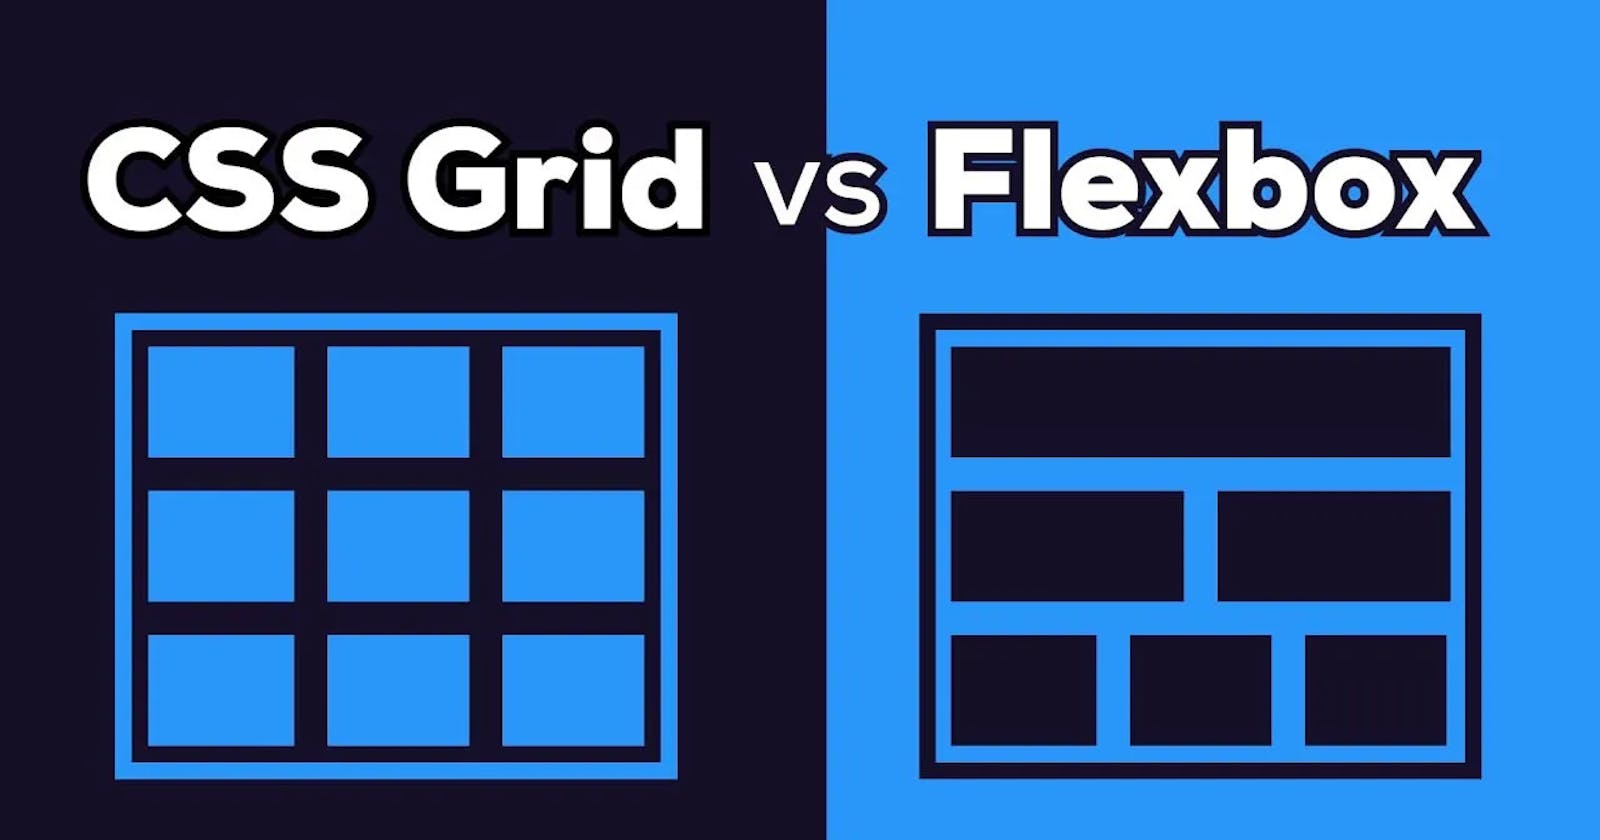 CSS Grid Or Flexbox - Deciding which to use